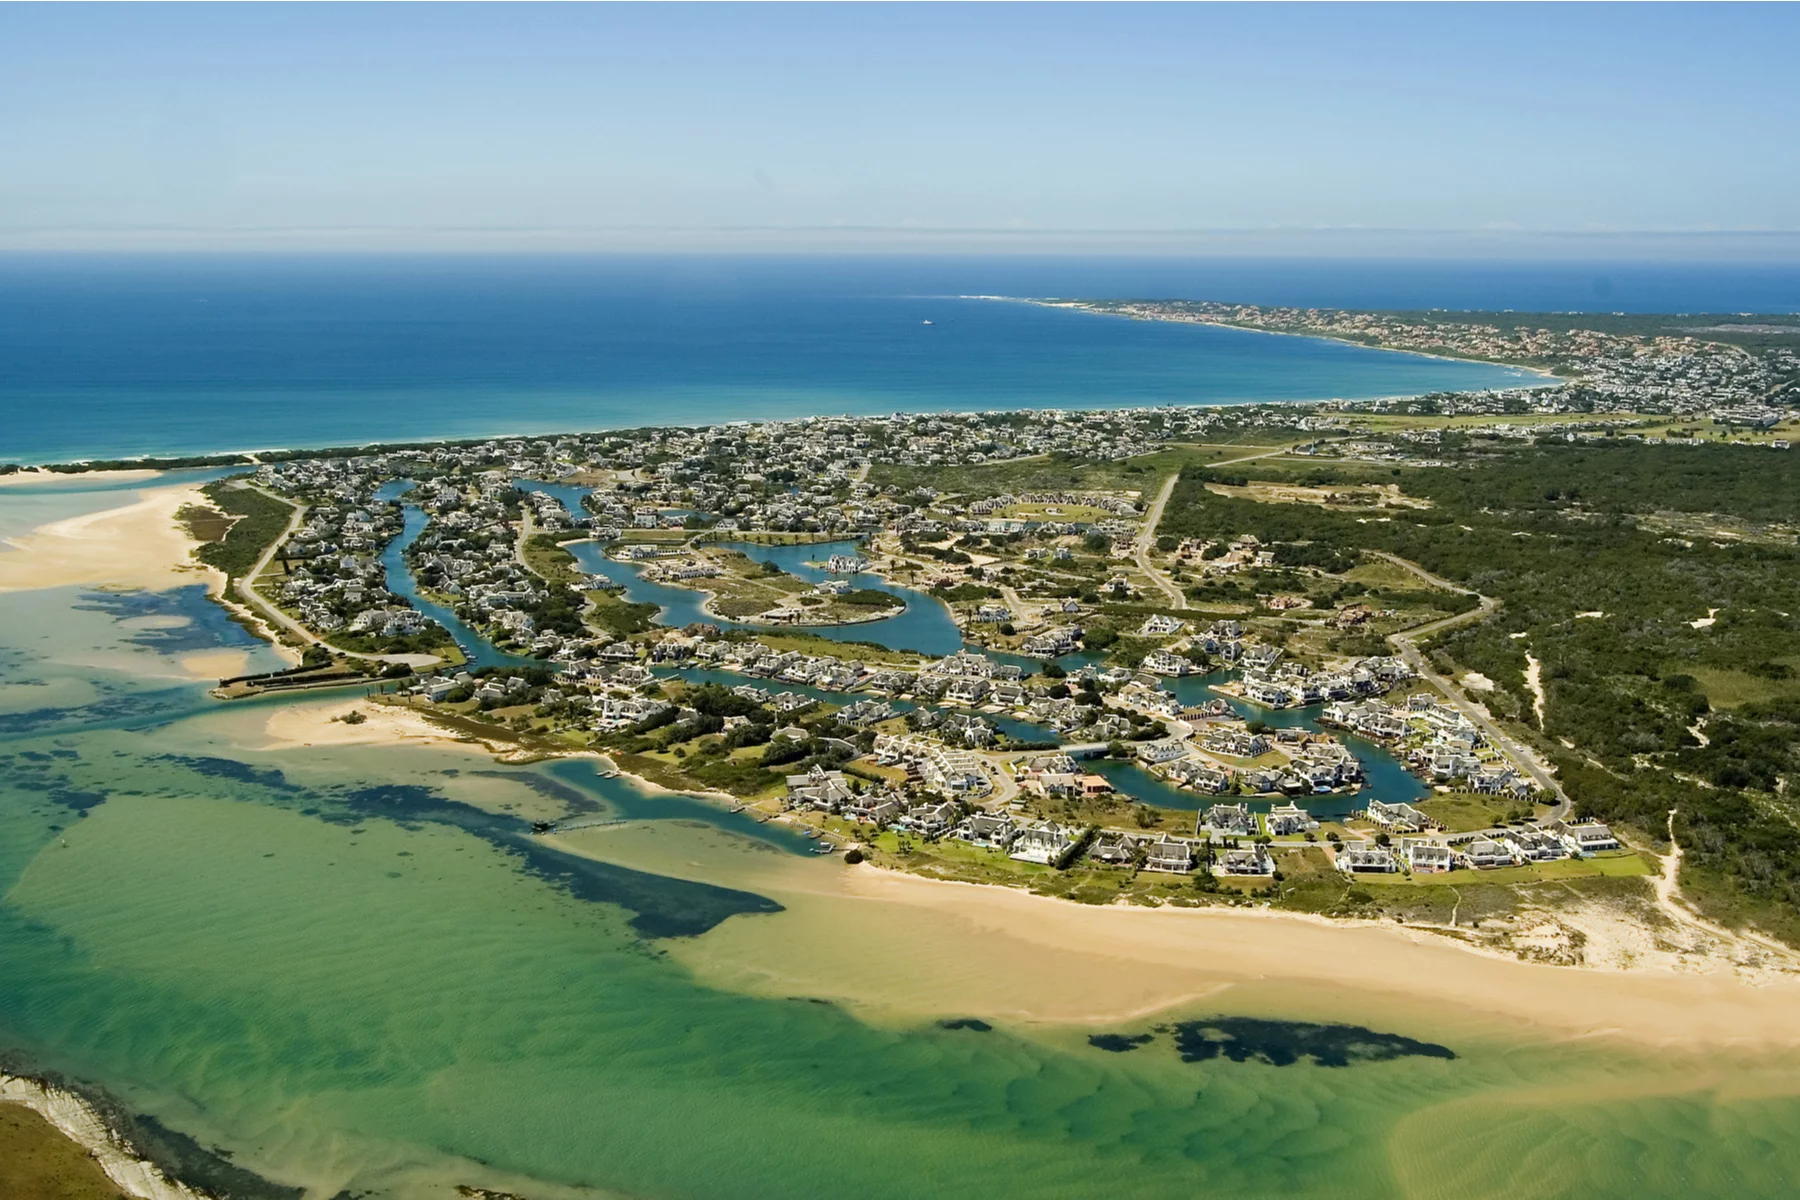 St. Francis Bay in South Africa